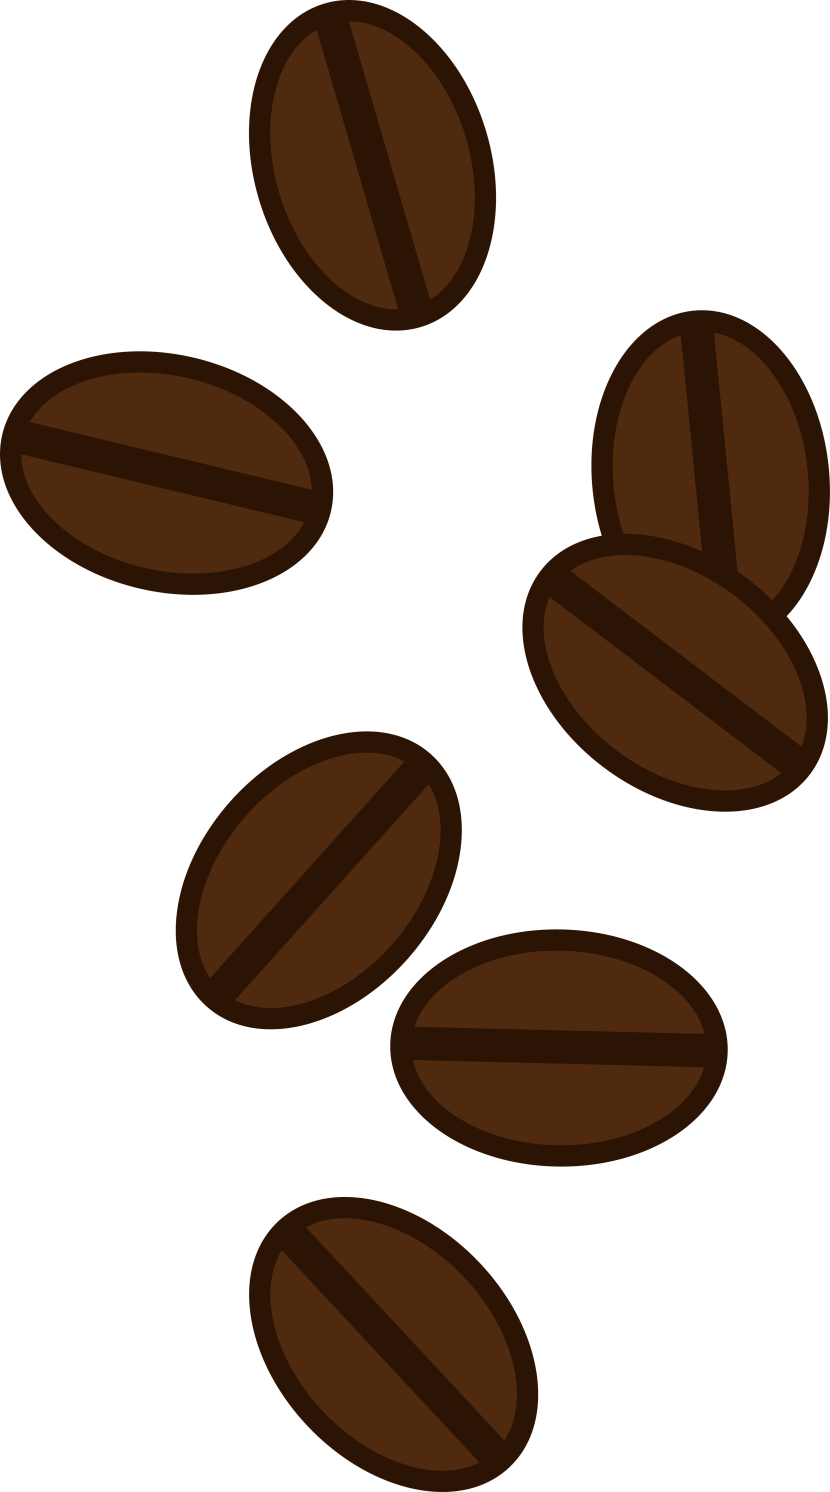 Best Coffee Clipart #25981 - Clipartion.com